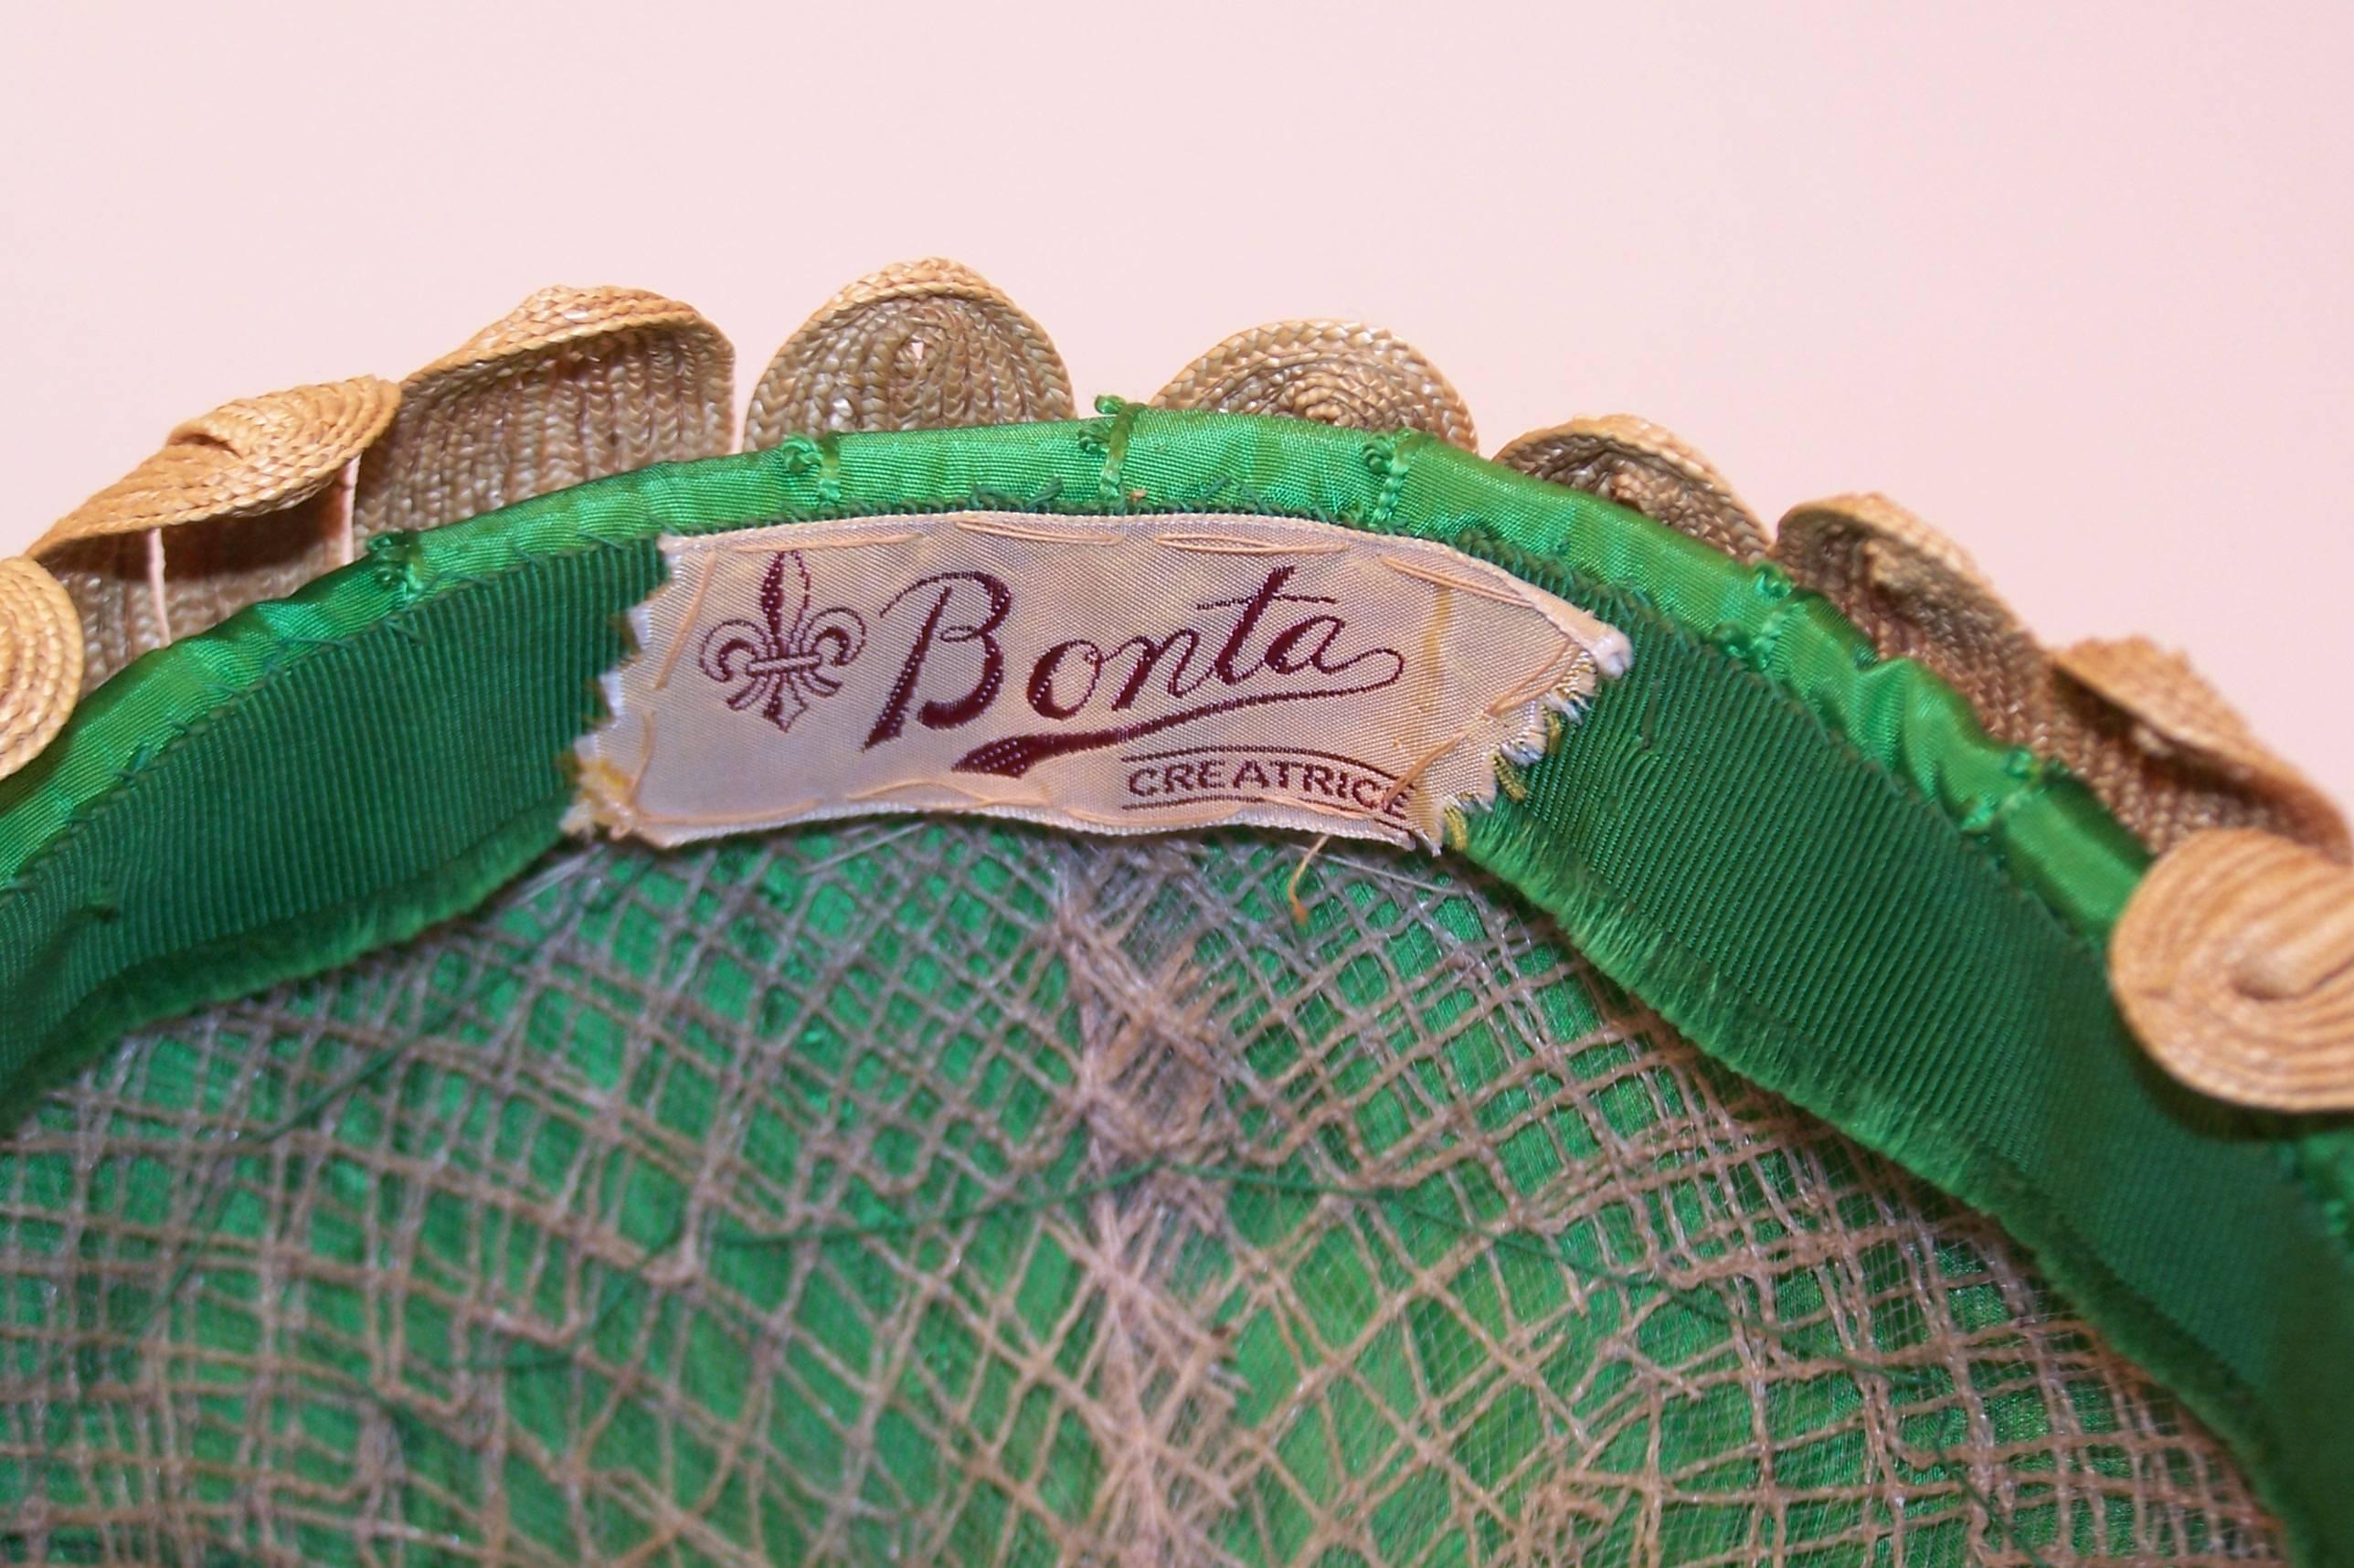 Whimsical 1950's Bonta Creatrice Straw Petal Hat With Kelly Green Bow 5